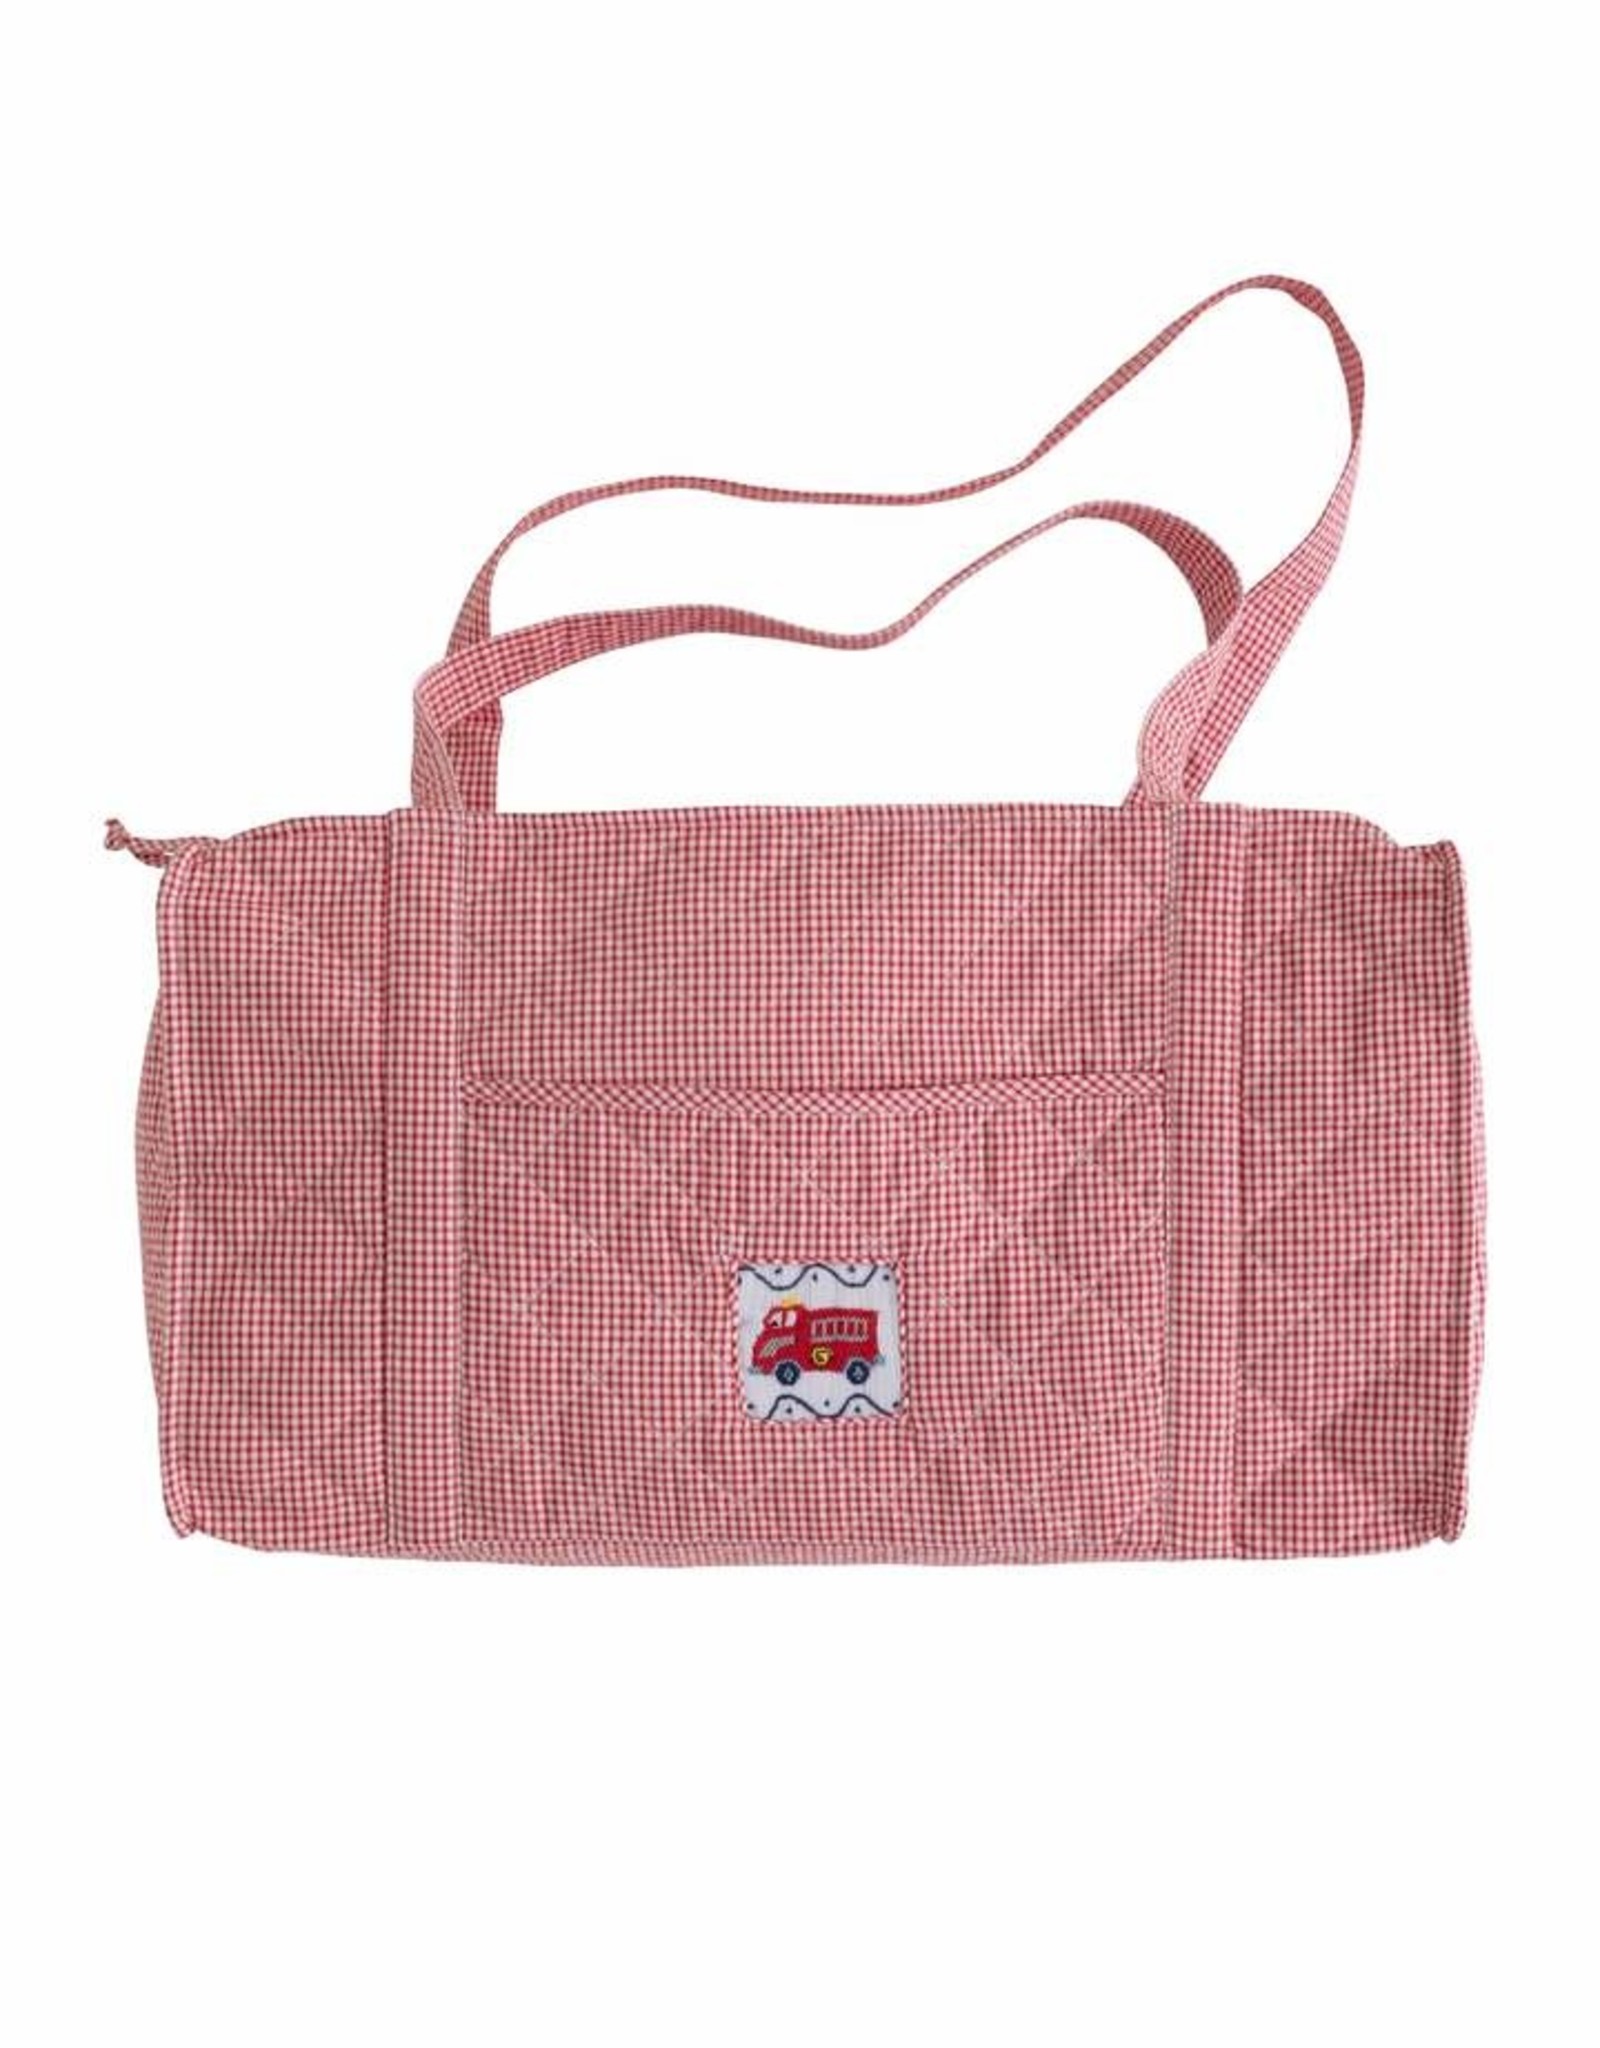 Little English Quilted Luggage - Red Firetruck